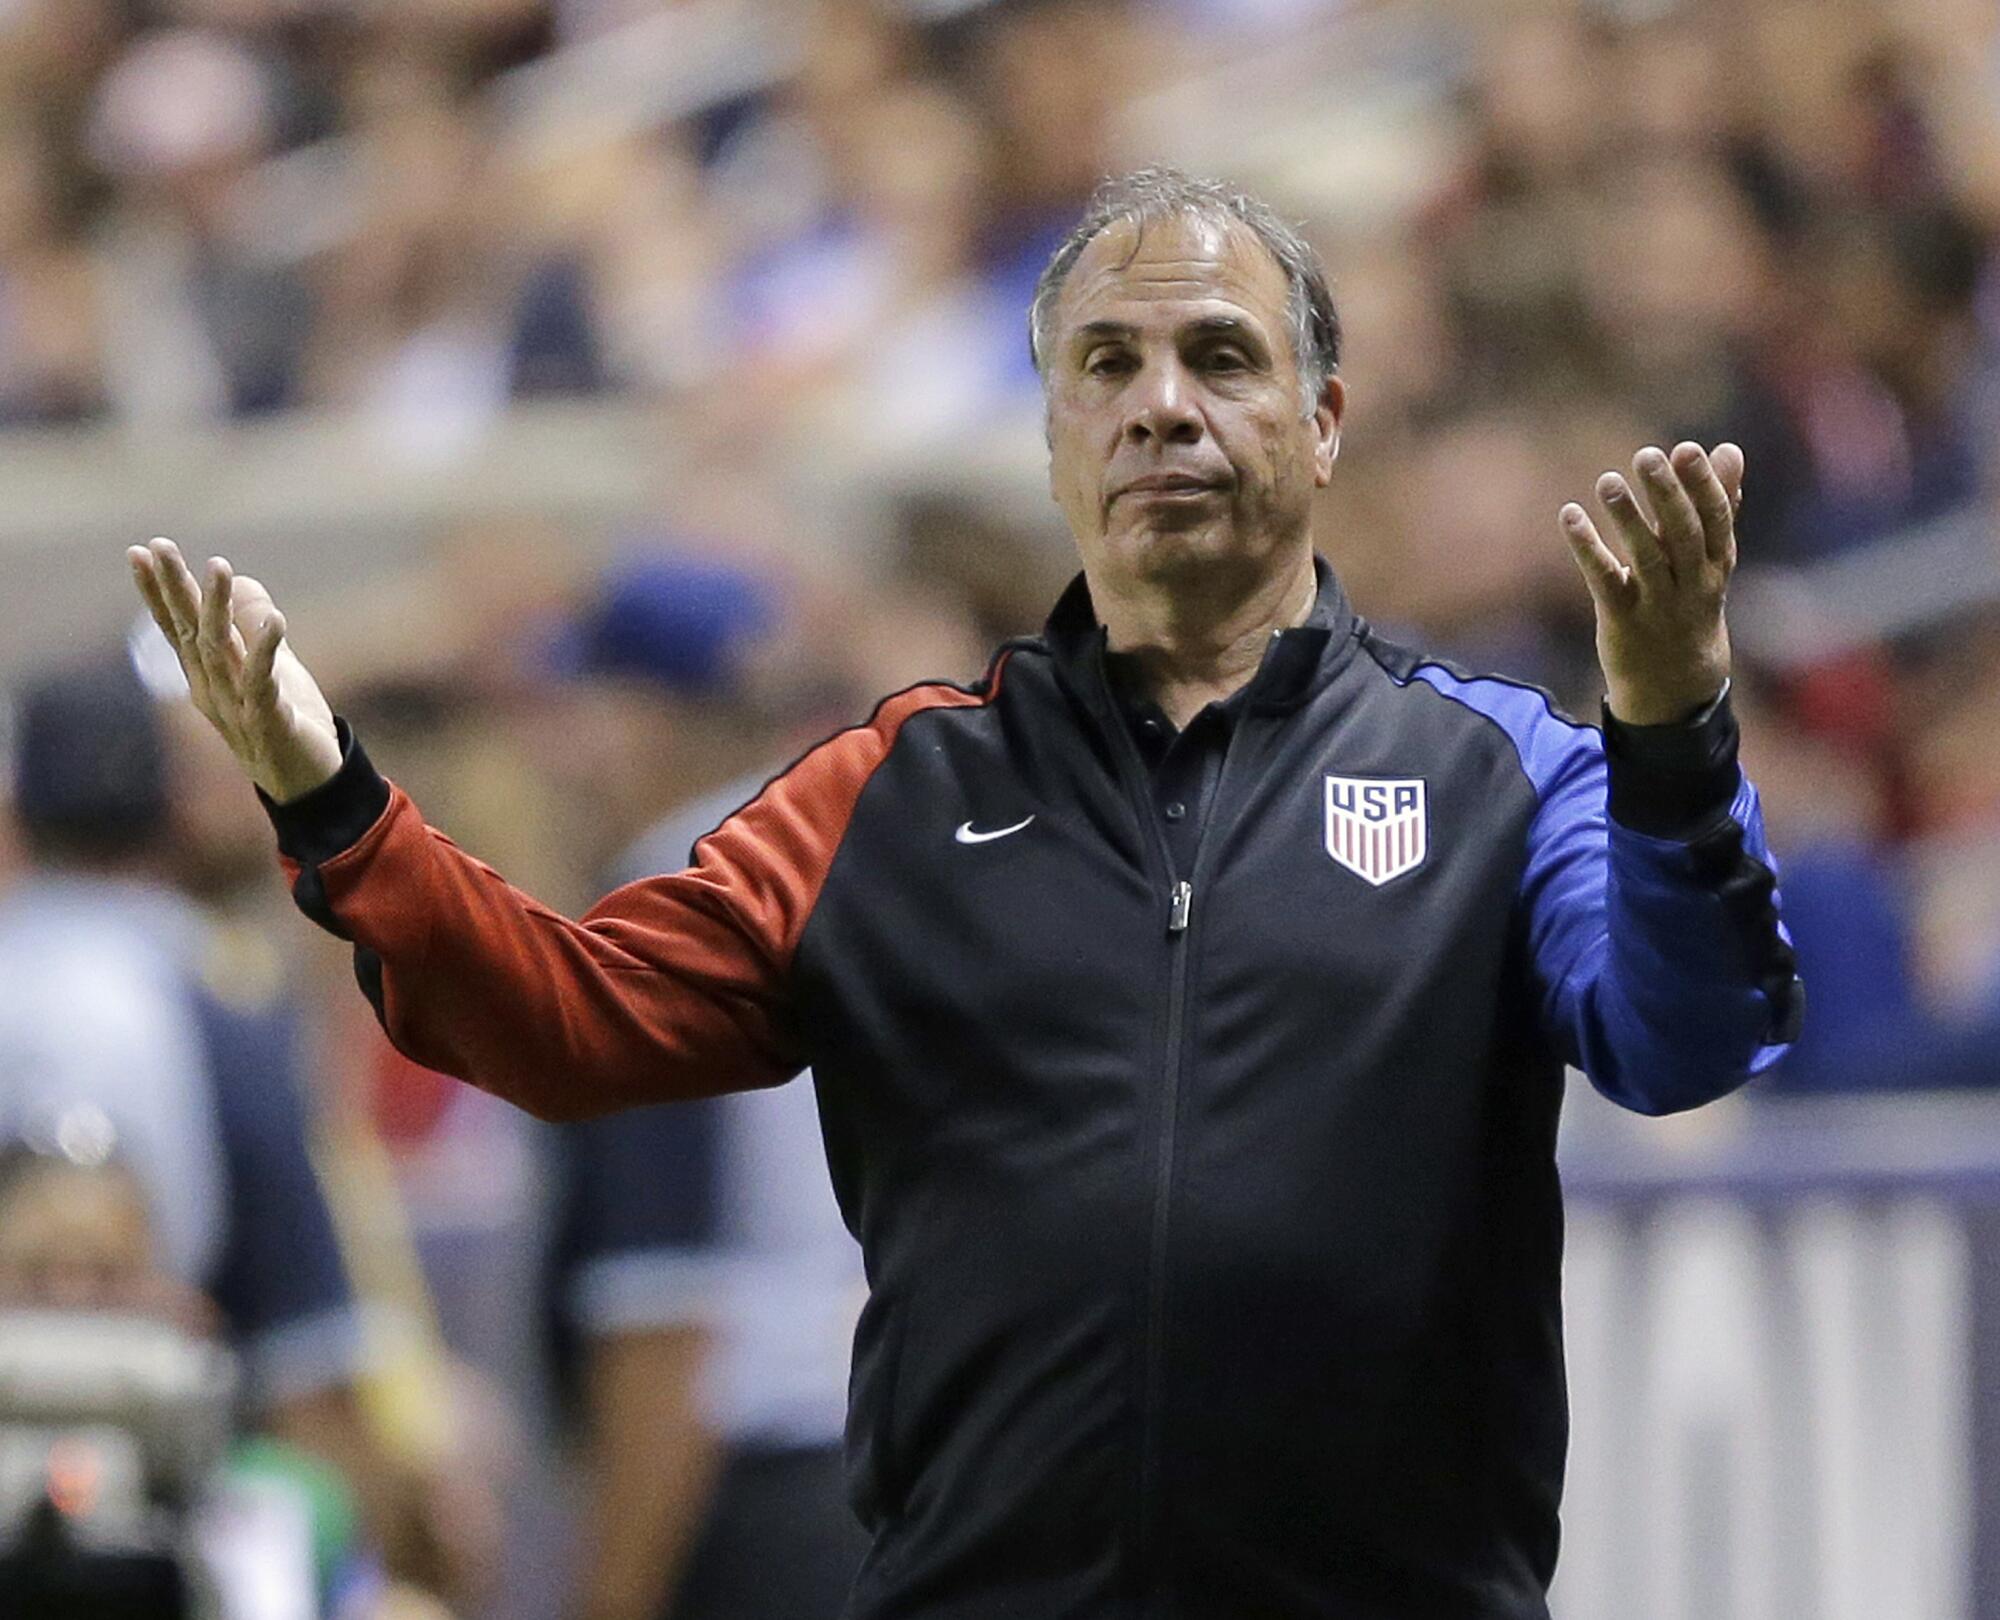 U.S. coach Bruce Arena reacts on the sideline during a match against Venezuela on June 3, 2017